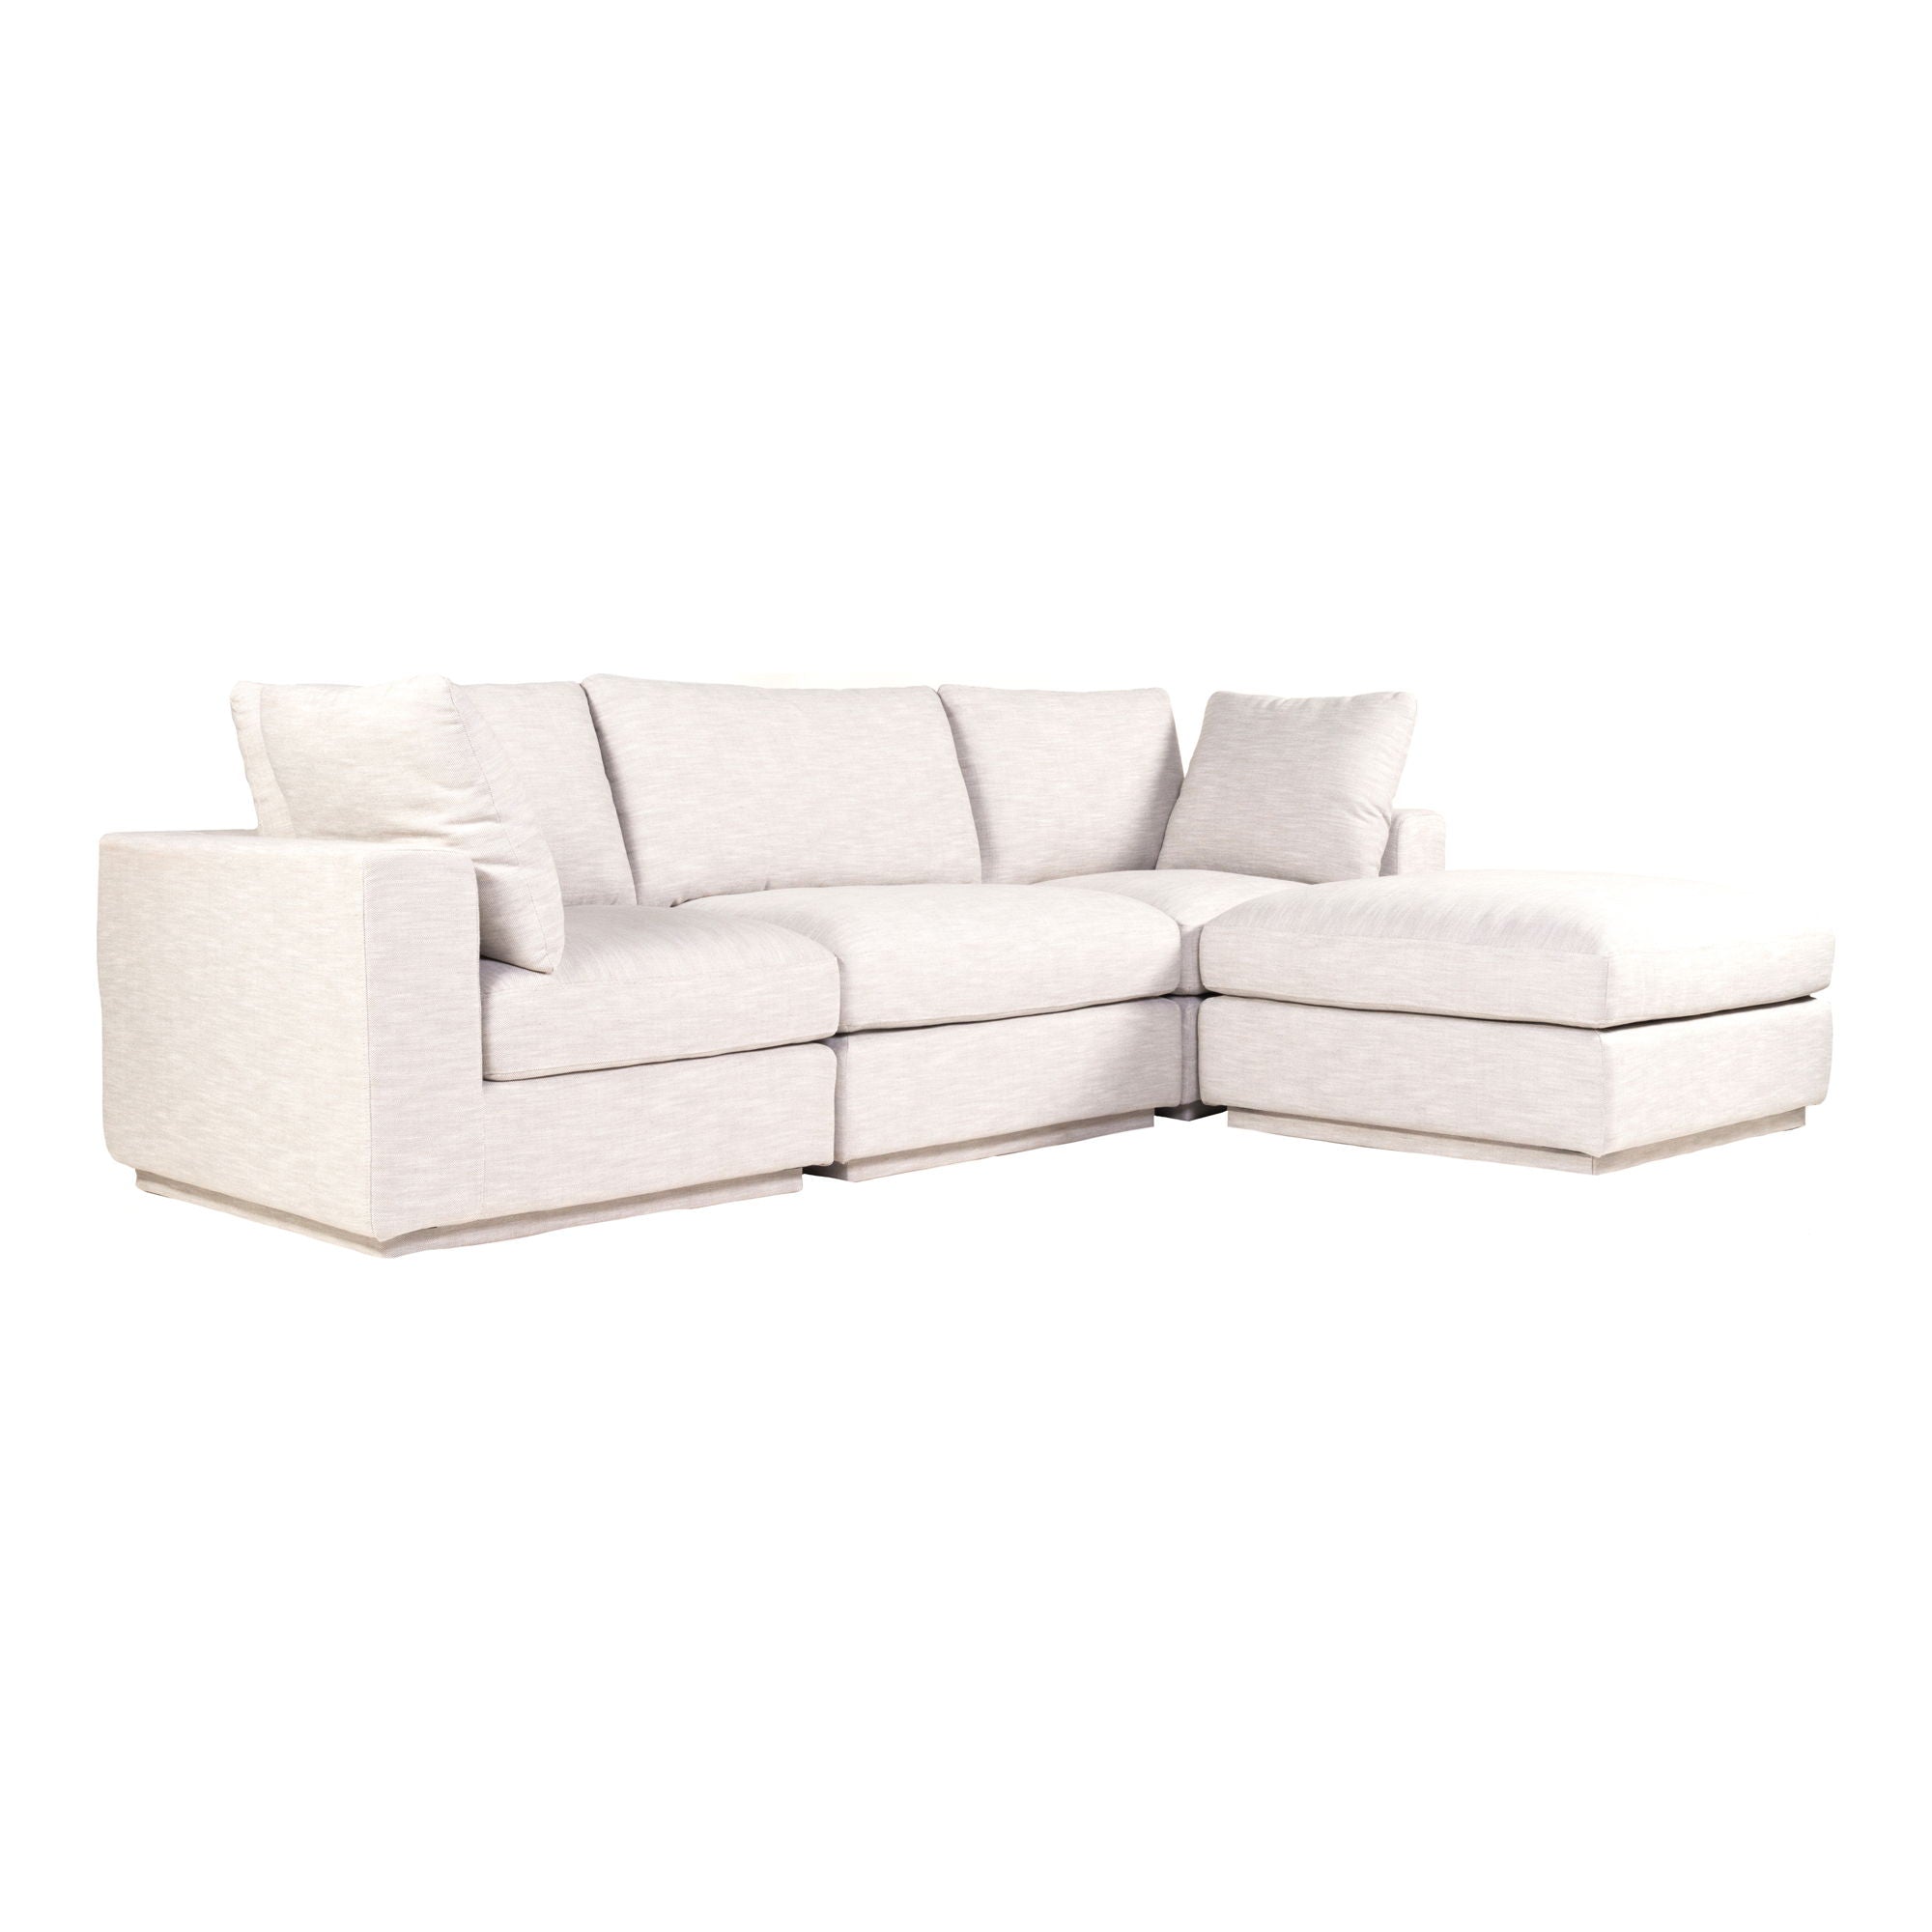 Justin Lounge Modular Sectional - Taupe - Modern & Comfy-Stationary Sectionals-American Furniture Outlet